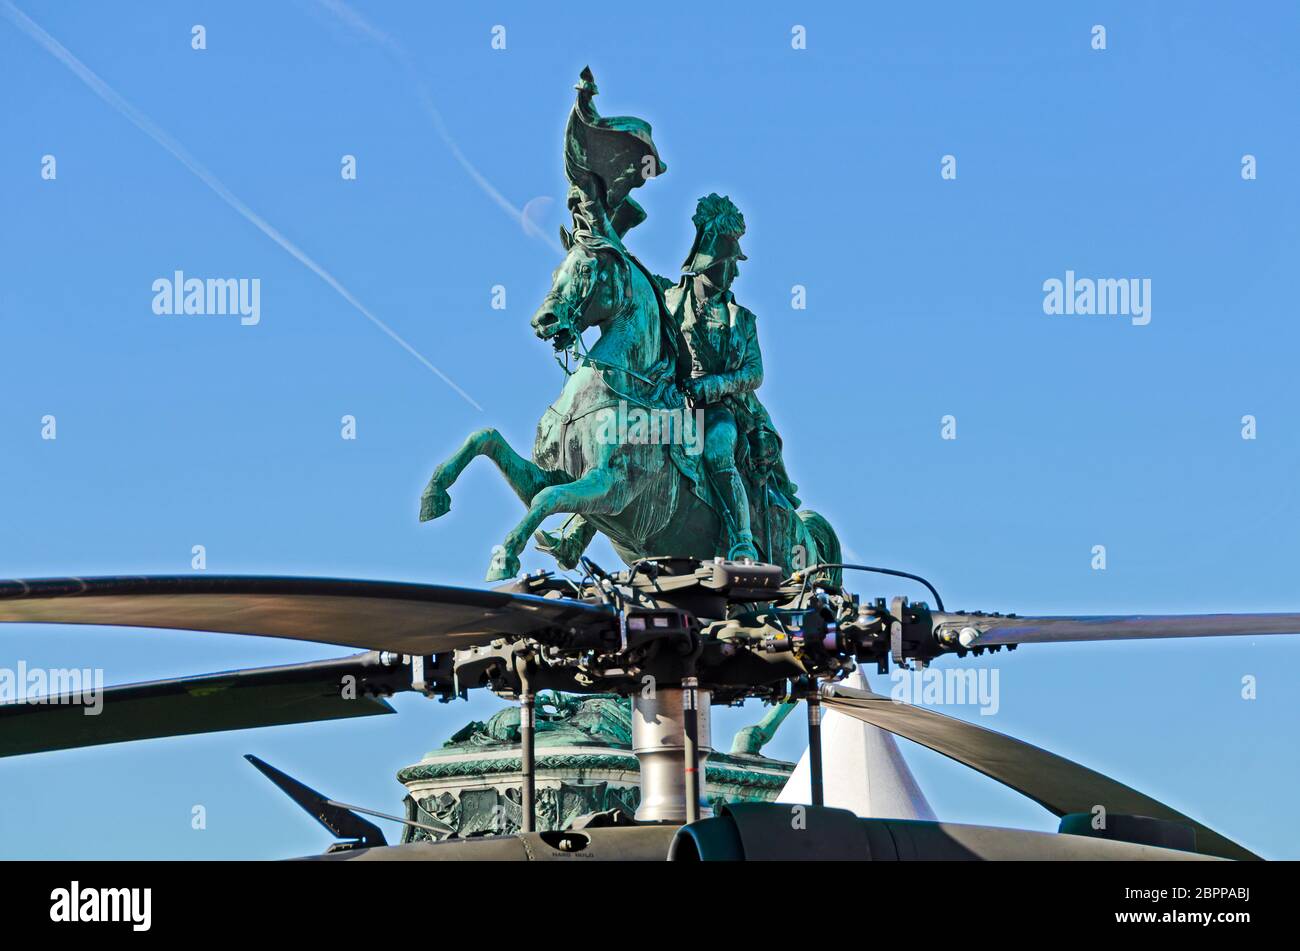 equestrian monument of emperor Charles at the heroes place in Vienna behind the rotor of a modern combat helicopter, Austria Stock Photo